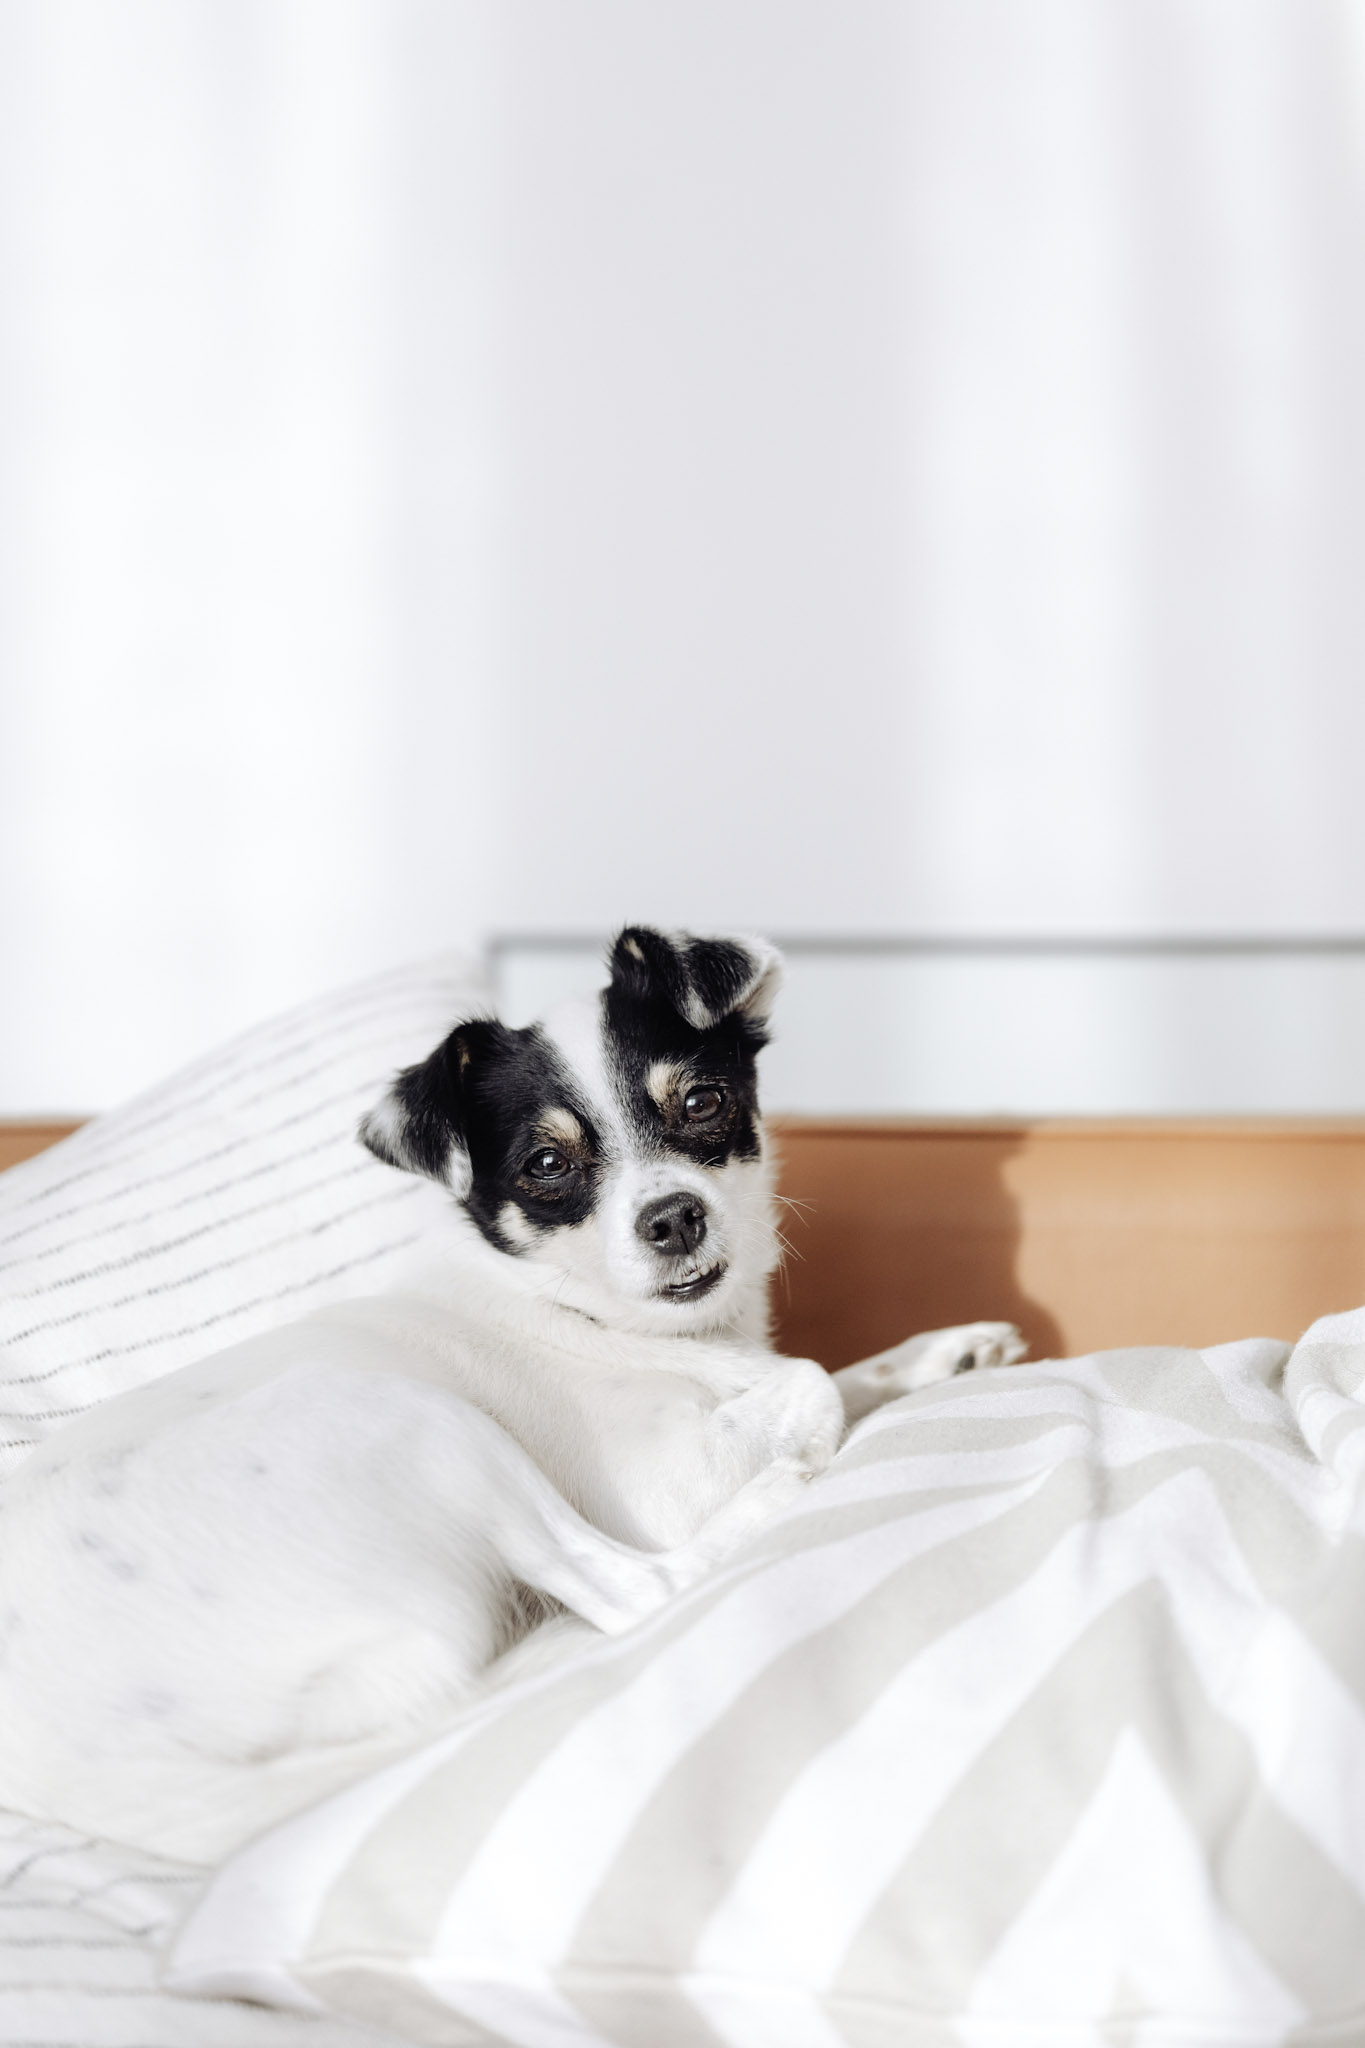 A small white and black dog is resting on a bed. This article covers tips for grooming your furry friend.